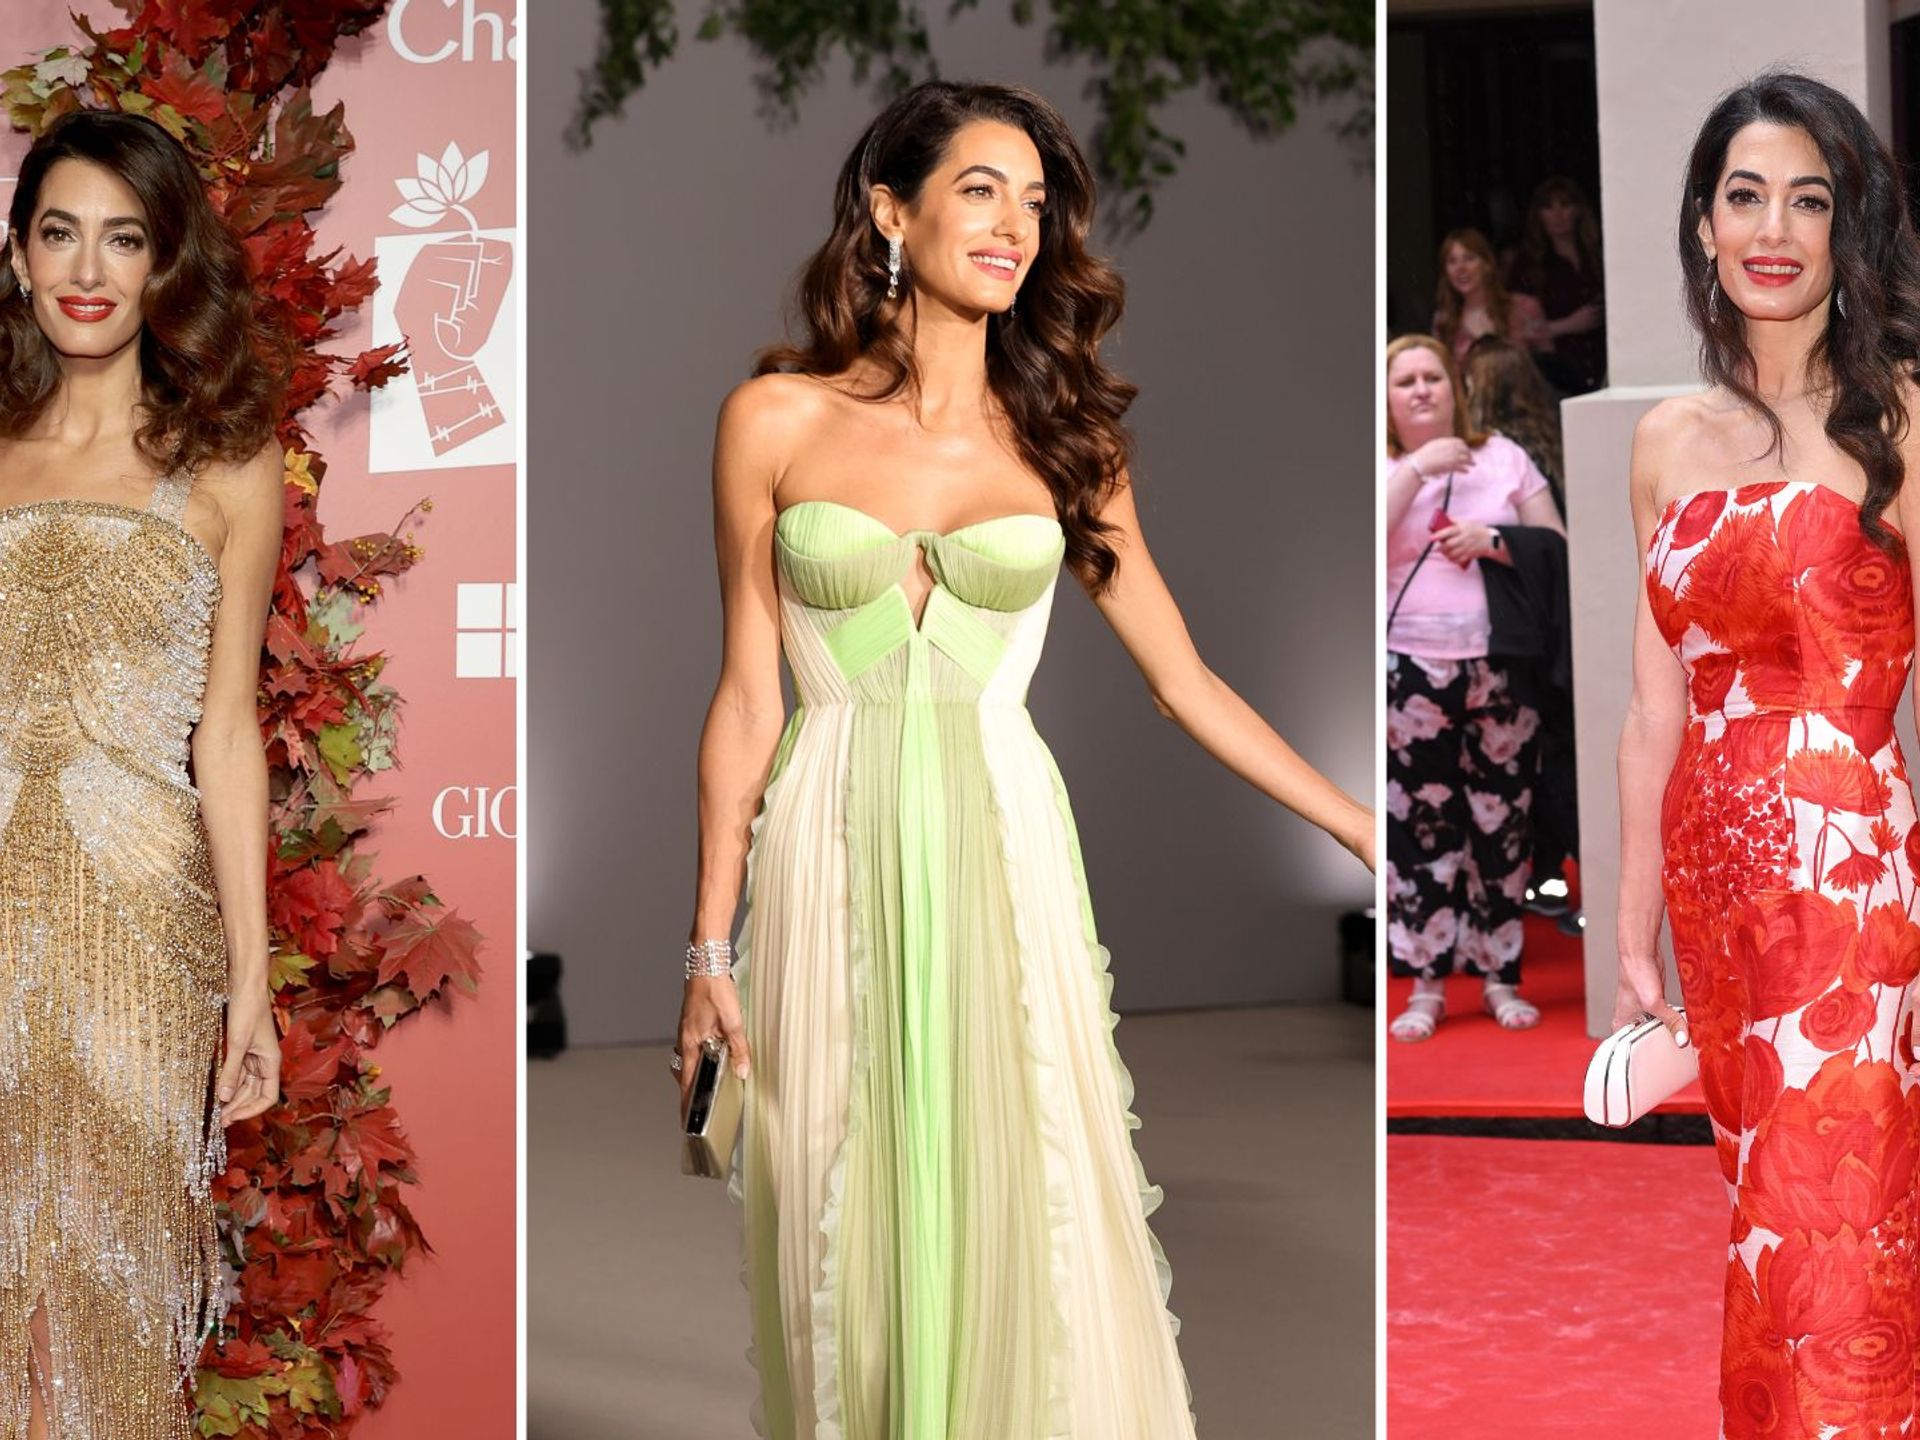 Amal Clooney Style: The lawyer's most iconic fashion moments of all time